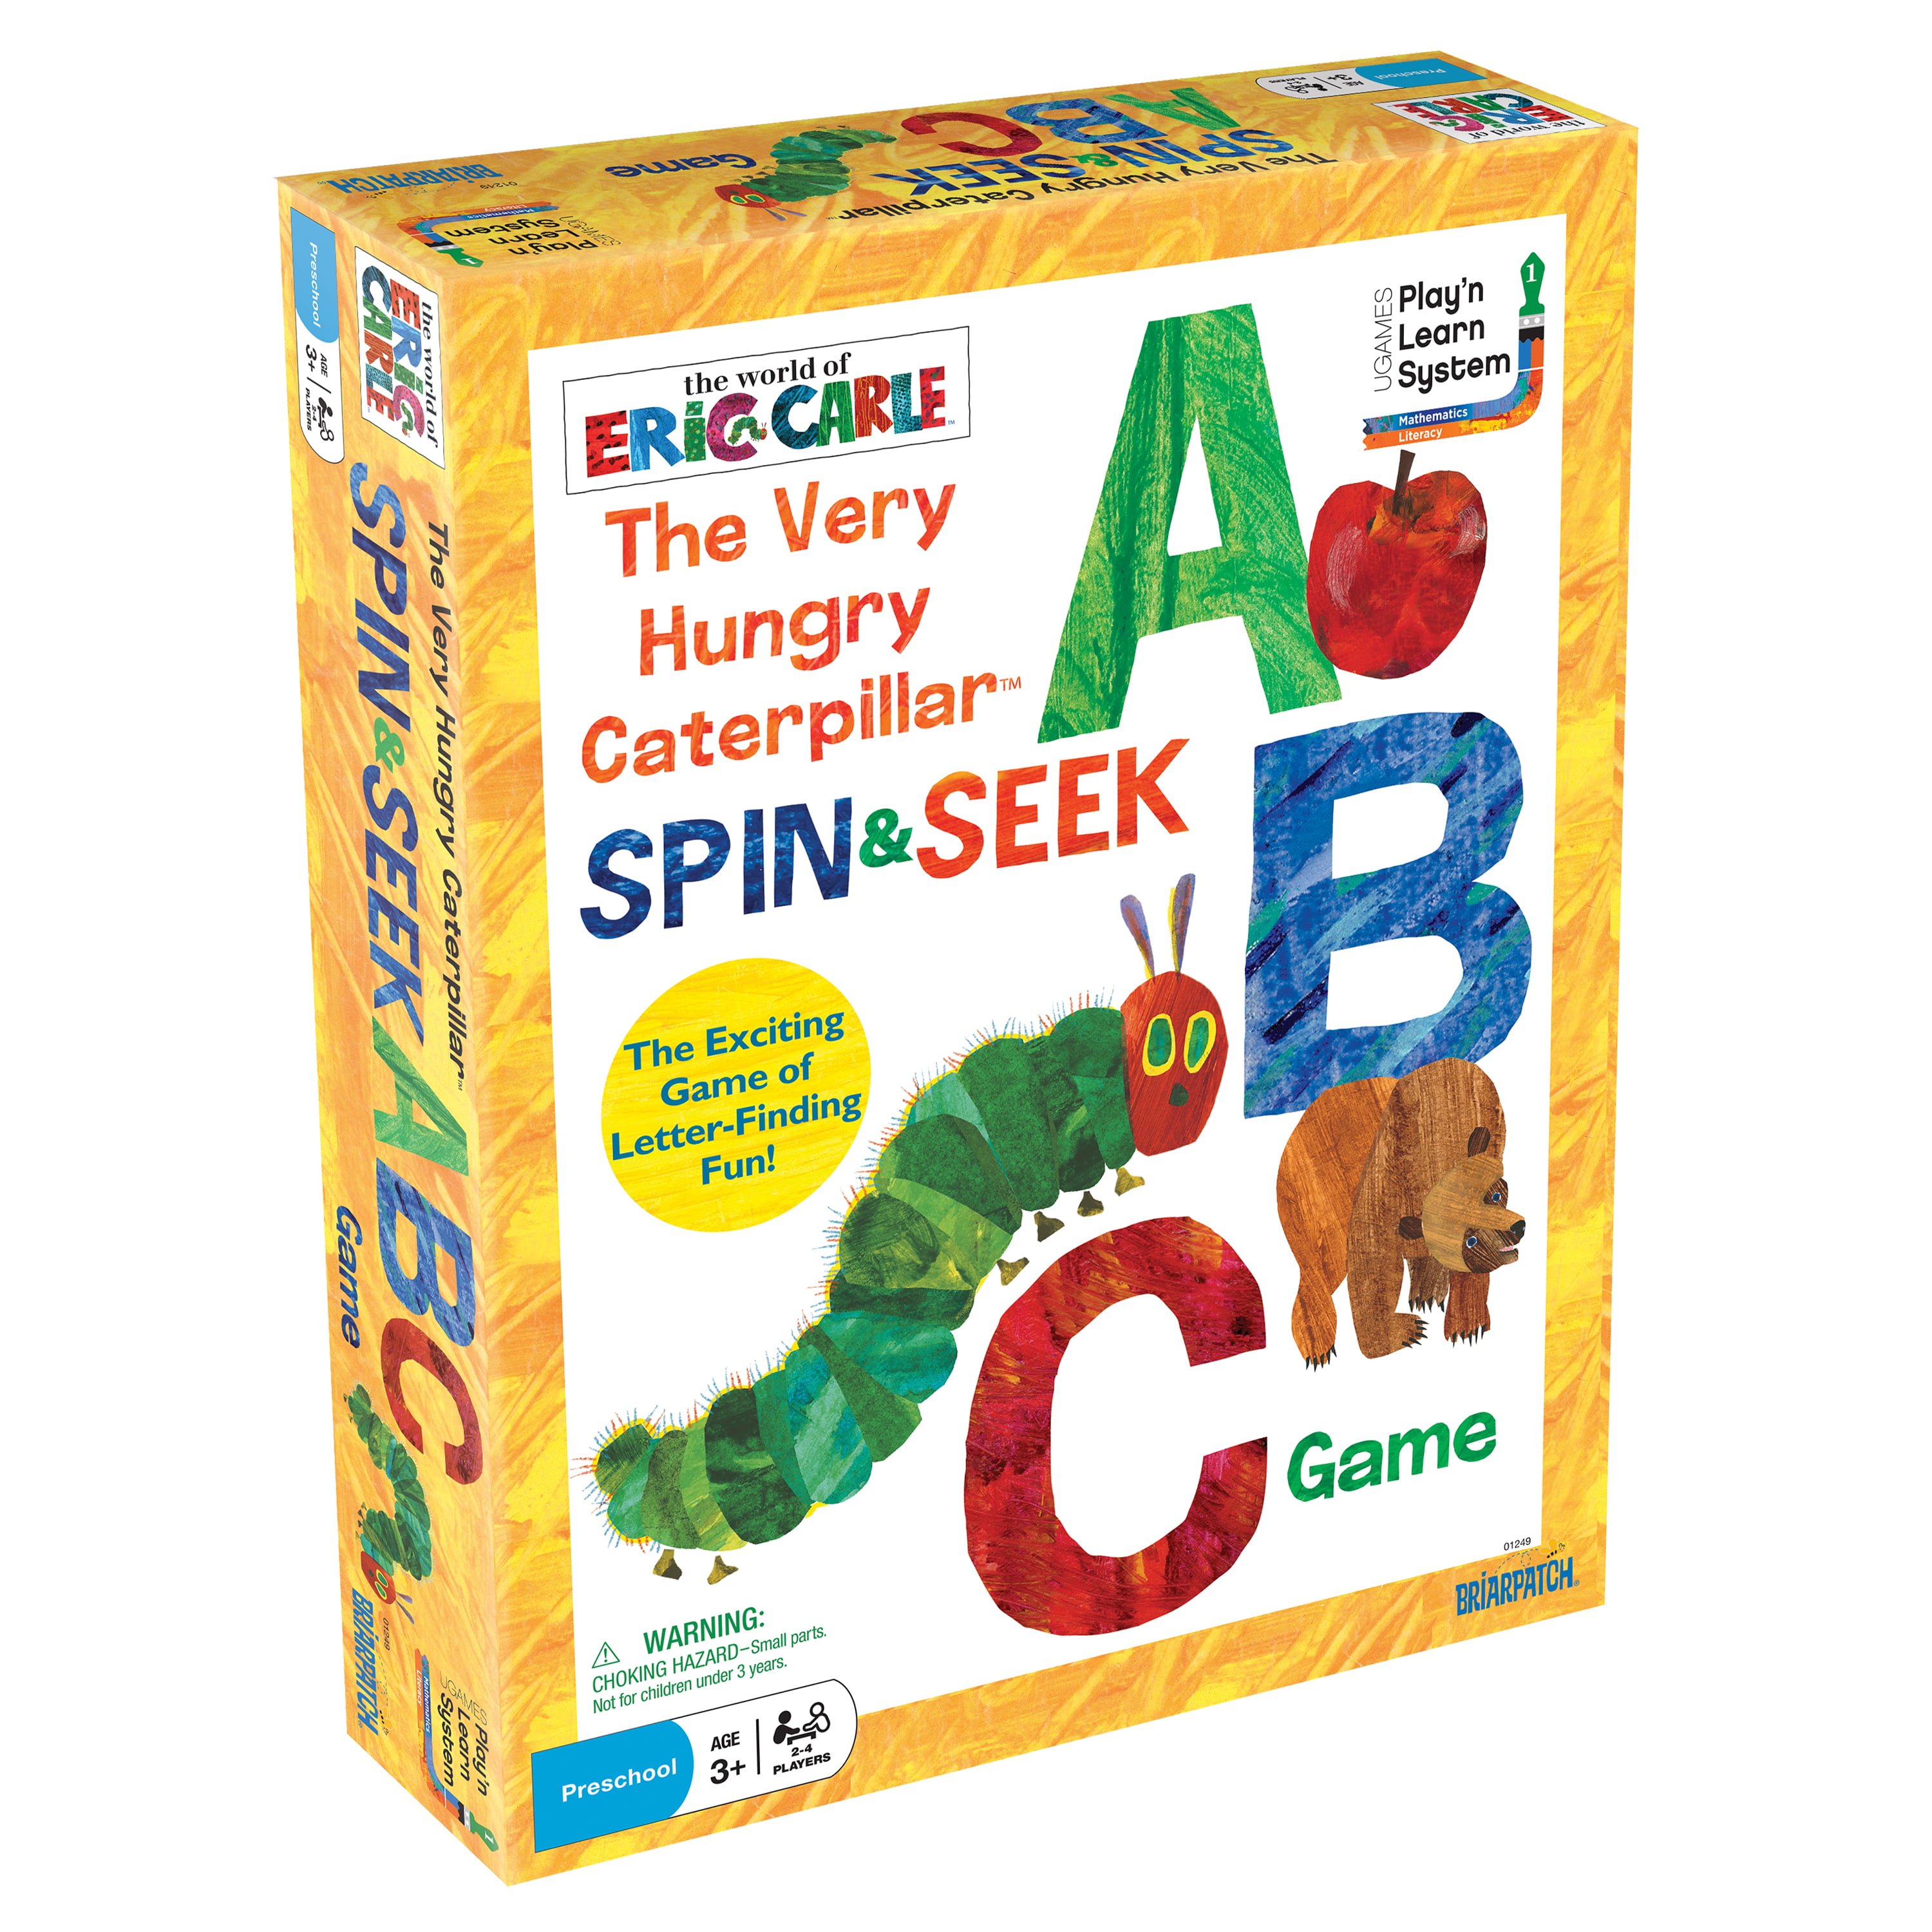 The Very Hungry Caterpillar Spin & Seek ABC Game from Briarpatch Based on The World of Eric Carle, Perfect for Preschoolers Learning Counting, for 2 to 4 Players Ages 3 and Up